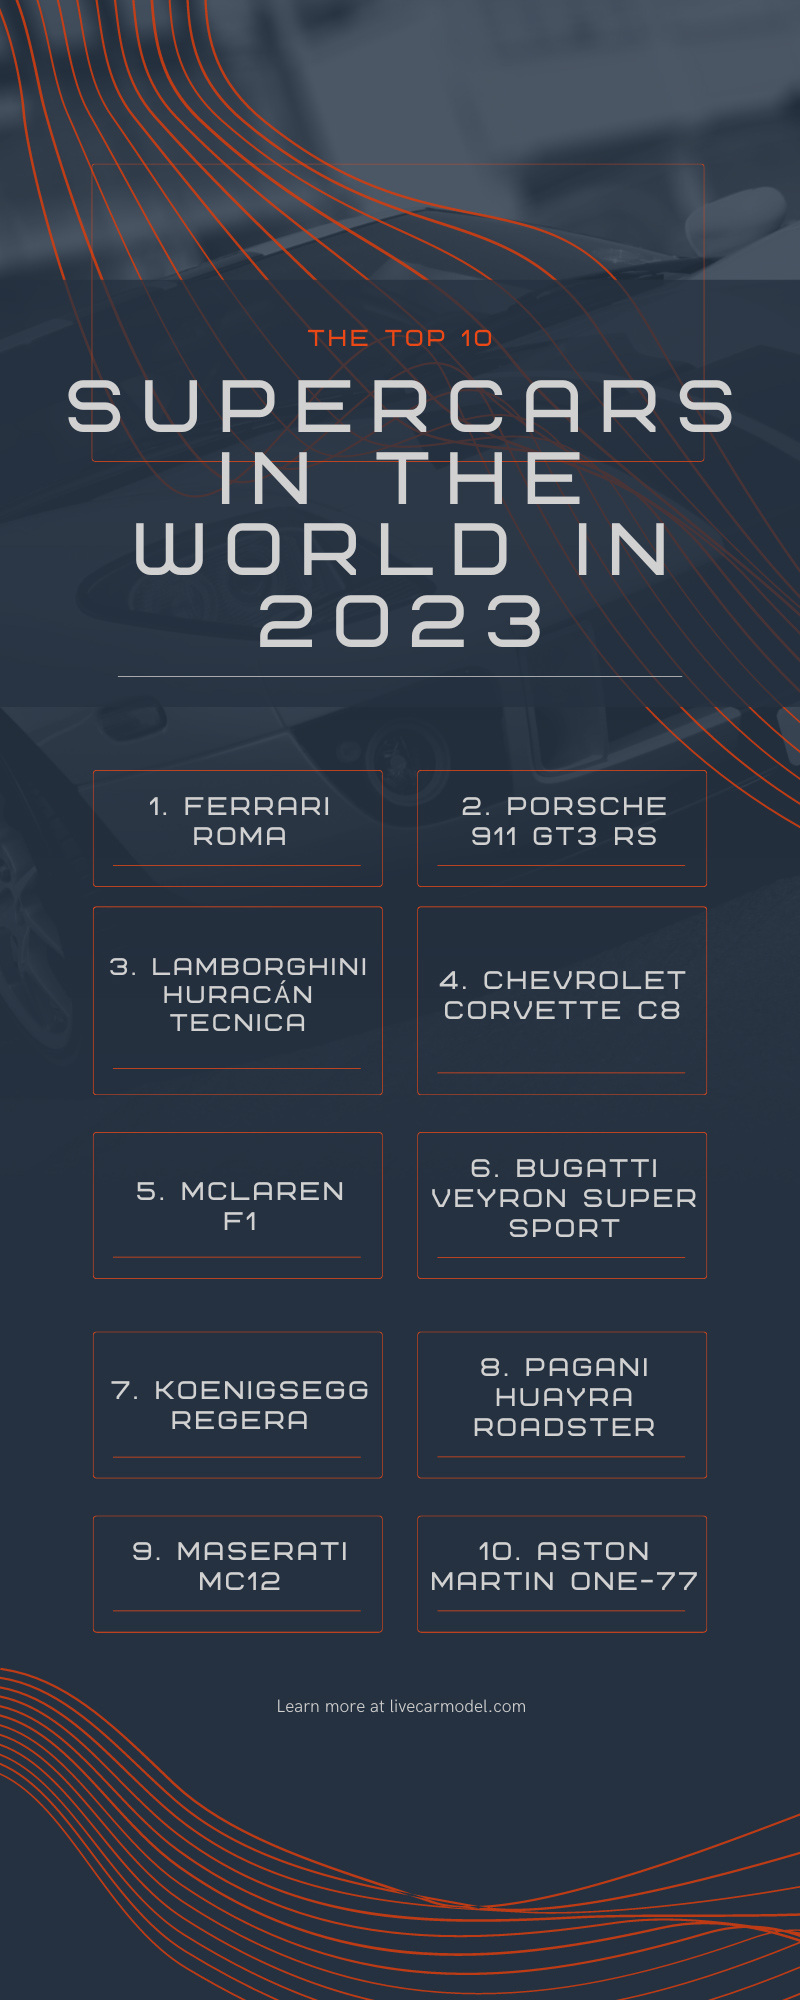 The Top 10 Supercars in the World in 2023